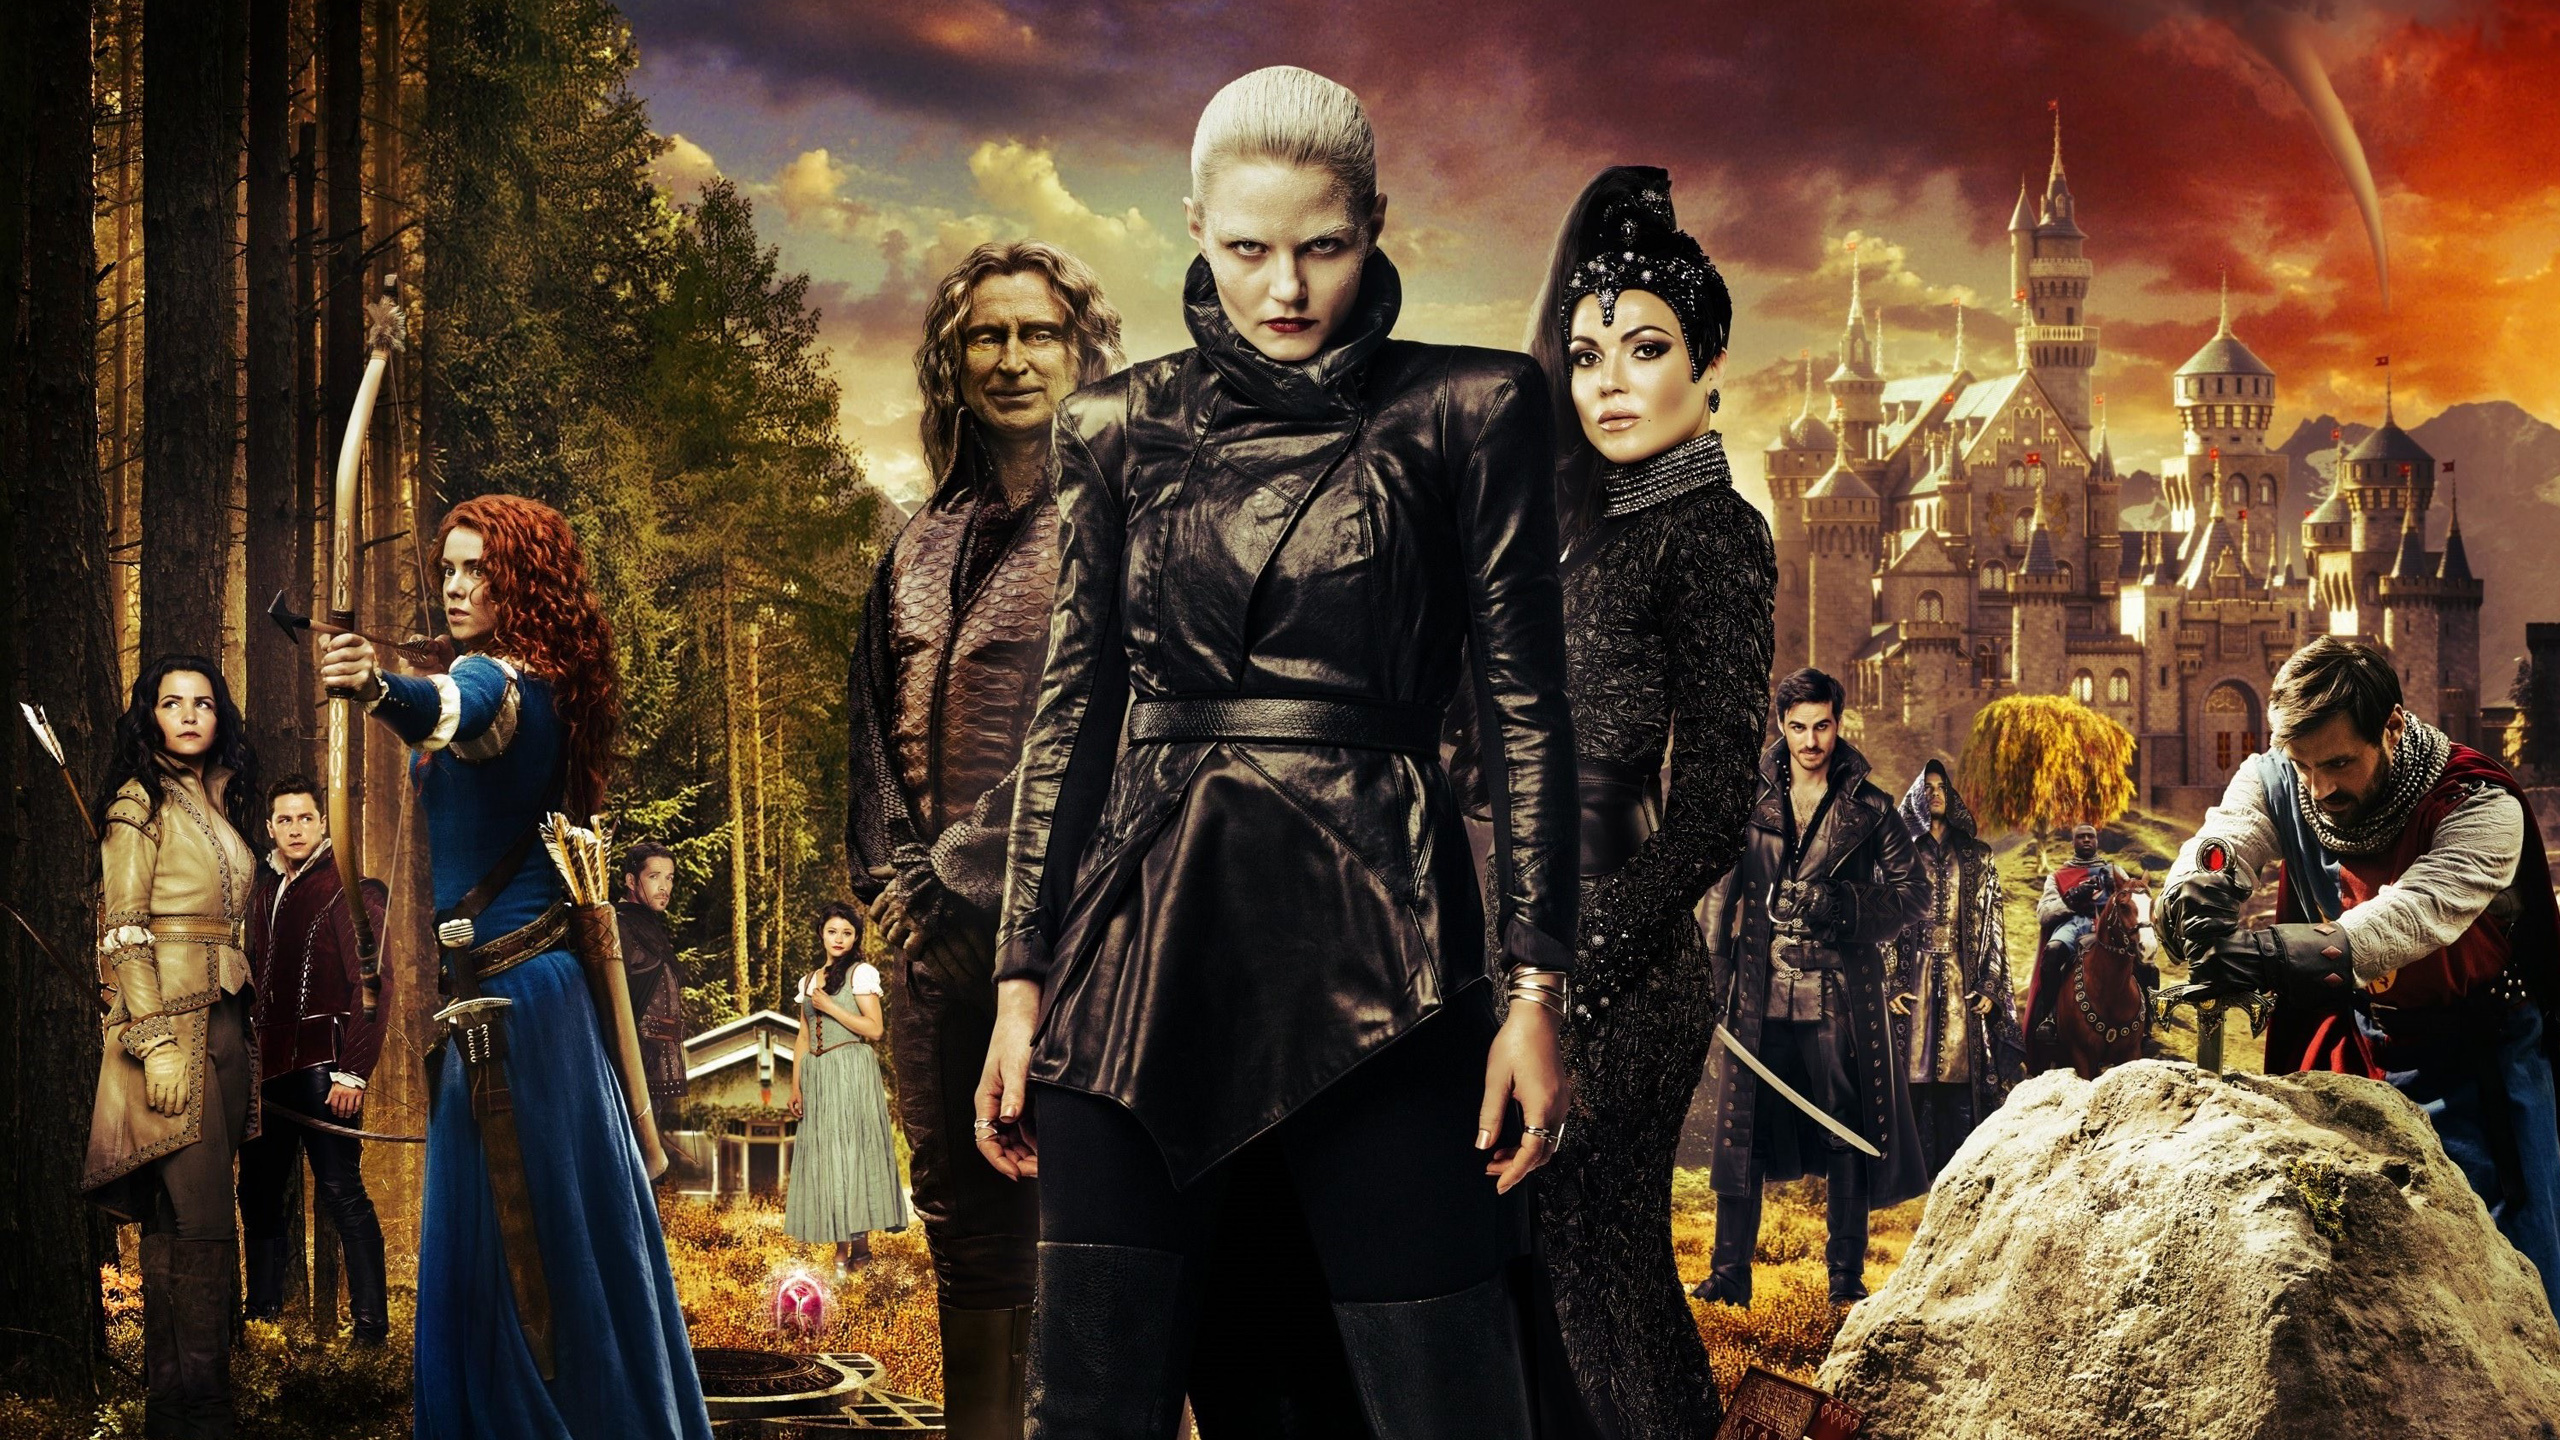 Once Upon a Time, Season 5 wallpapers, High-definition visuals, Captivating scenes, 2560x1440 HD Desktop